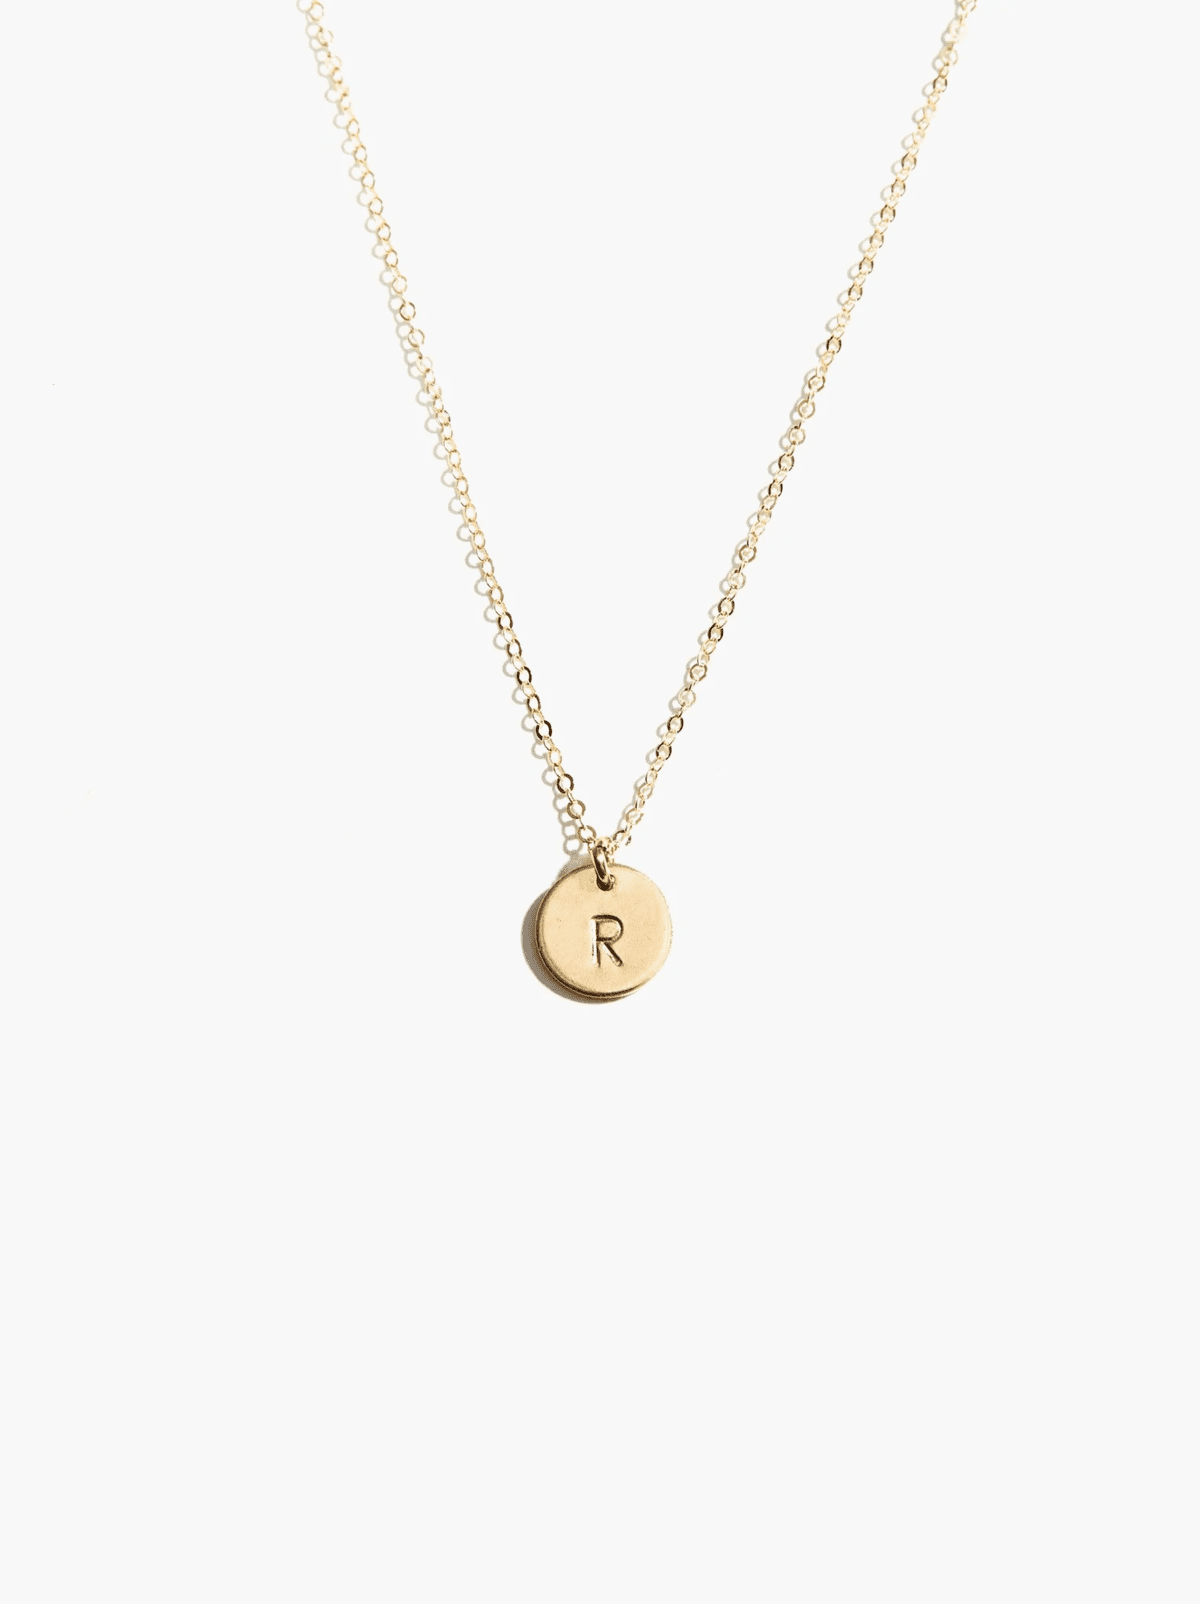 Gold necklace with an R on it.